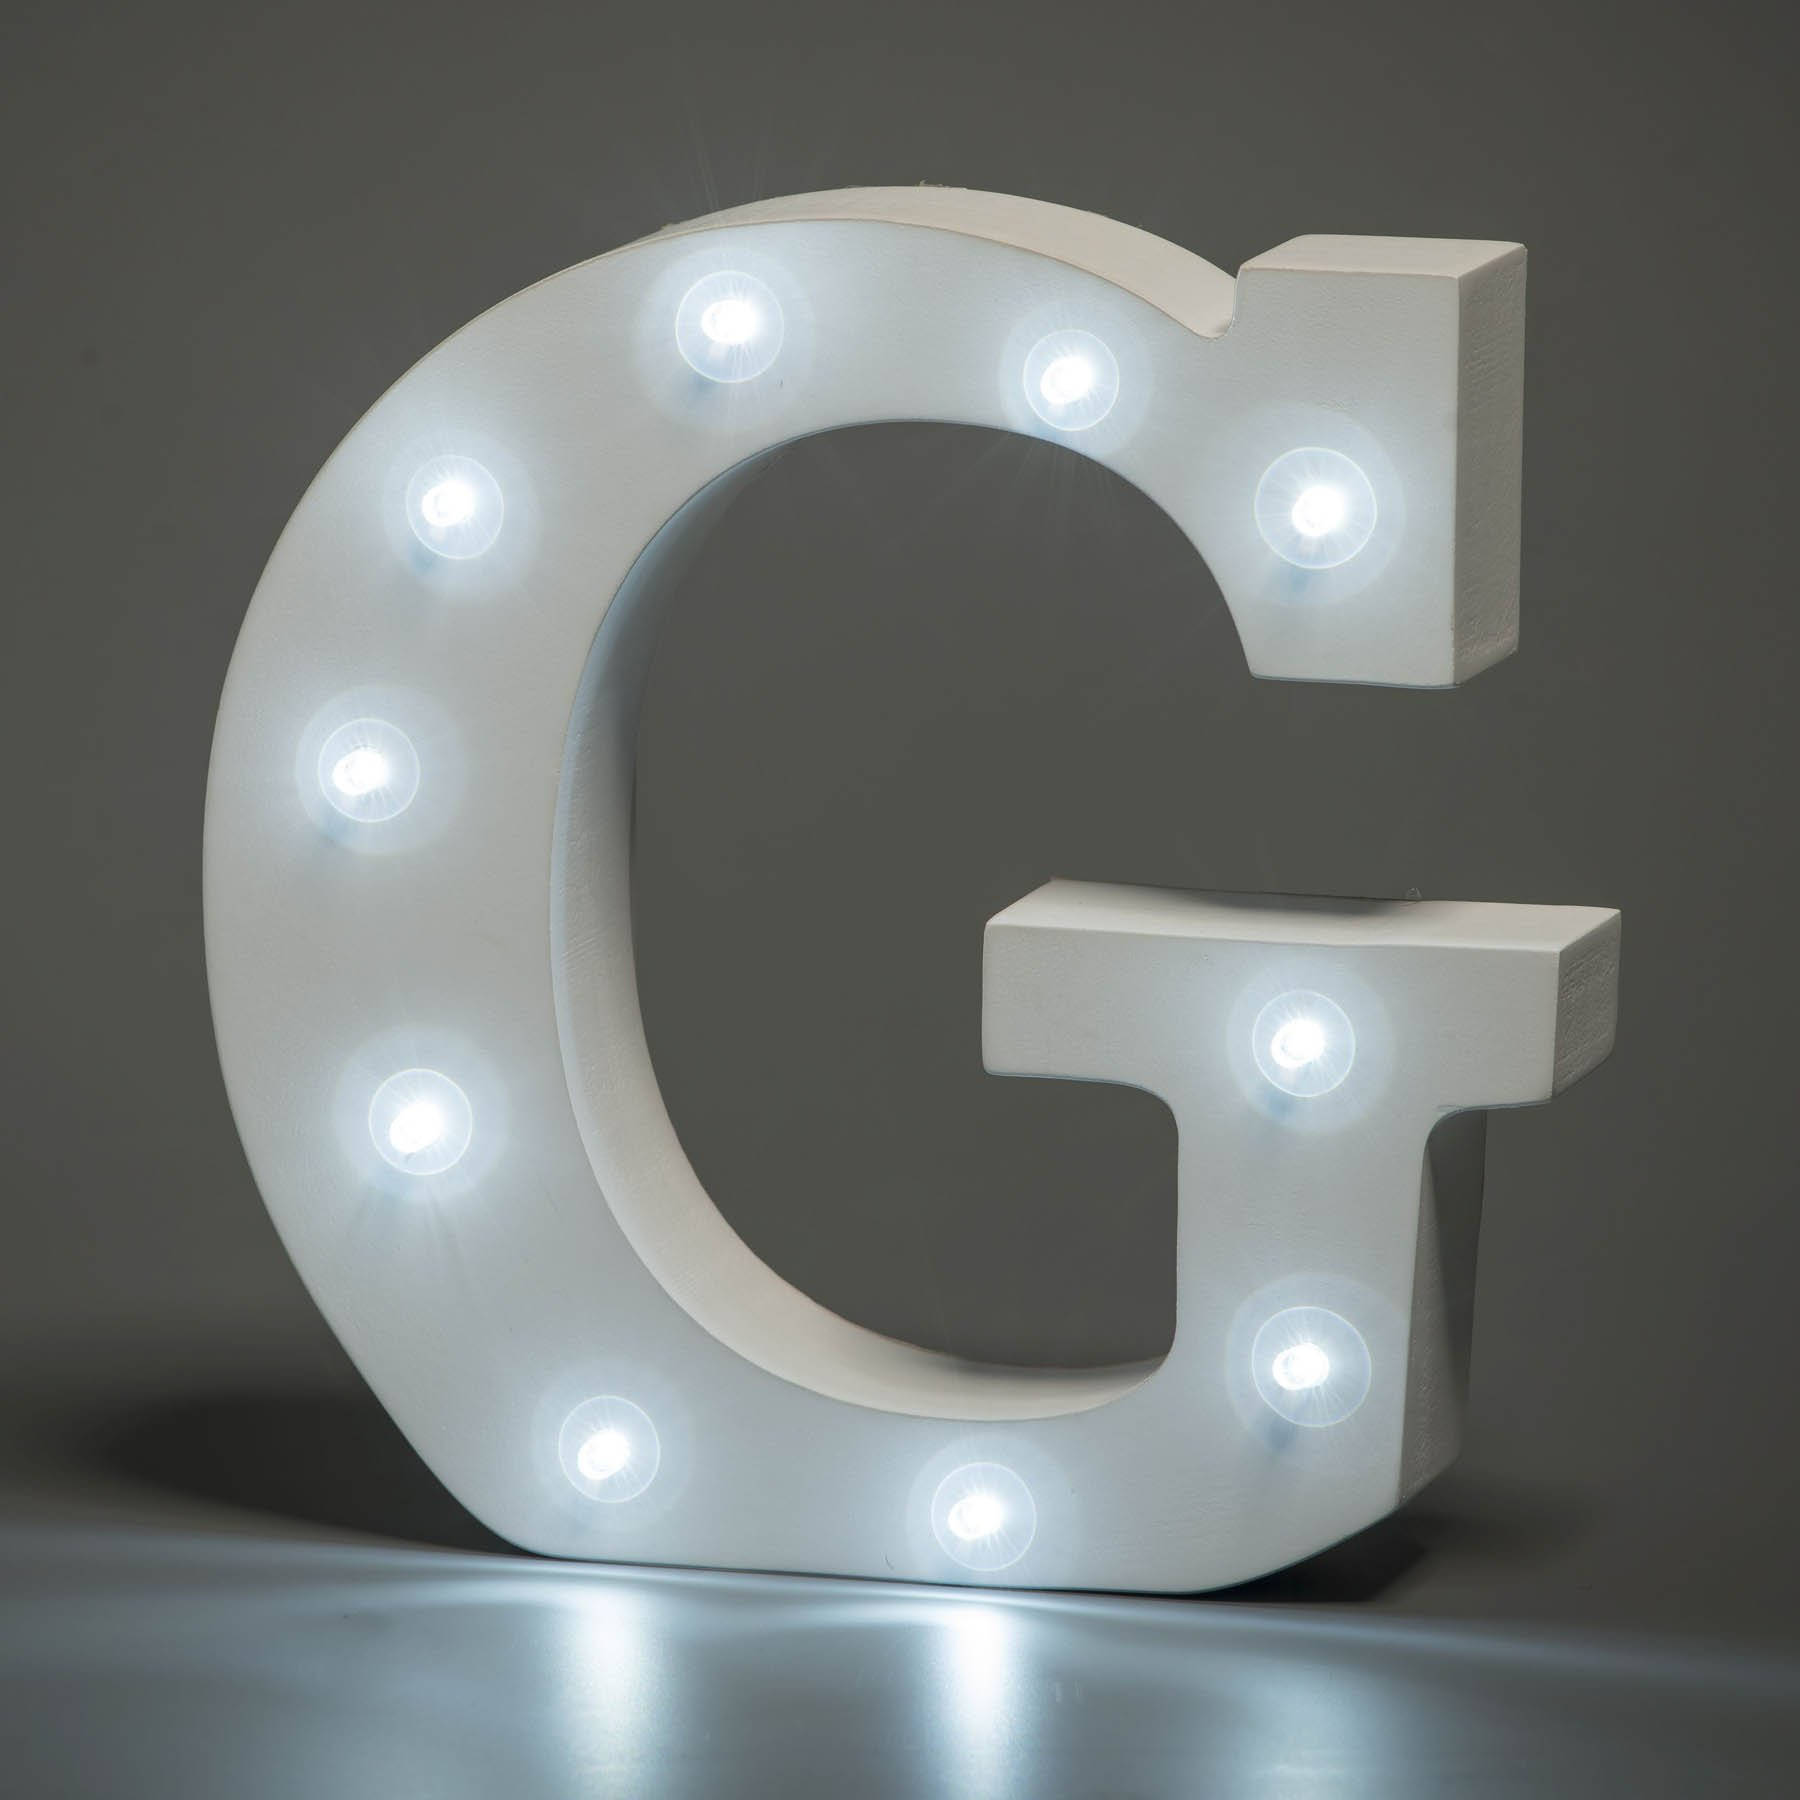 3d Letter G With Lights